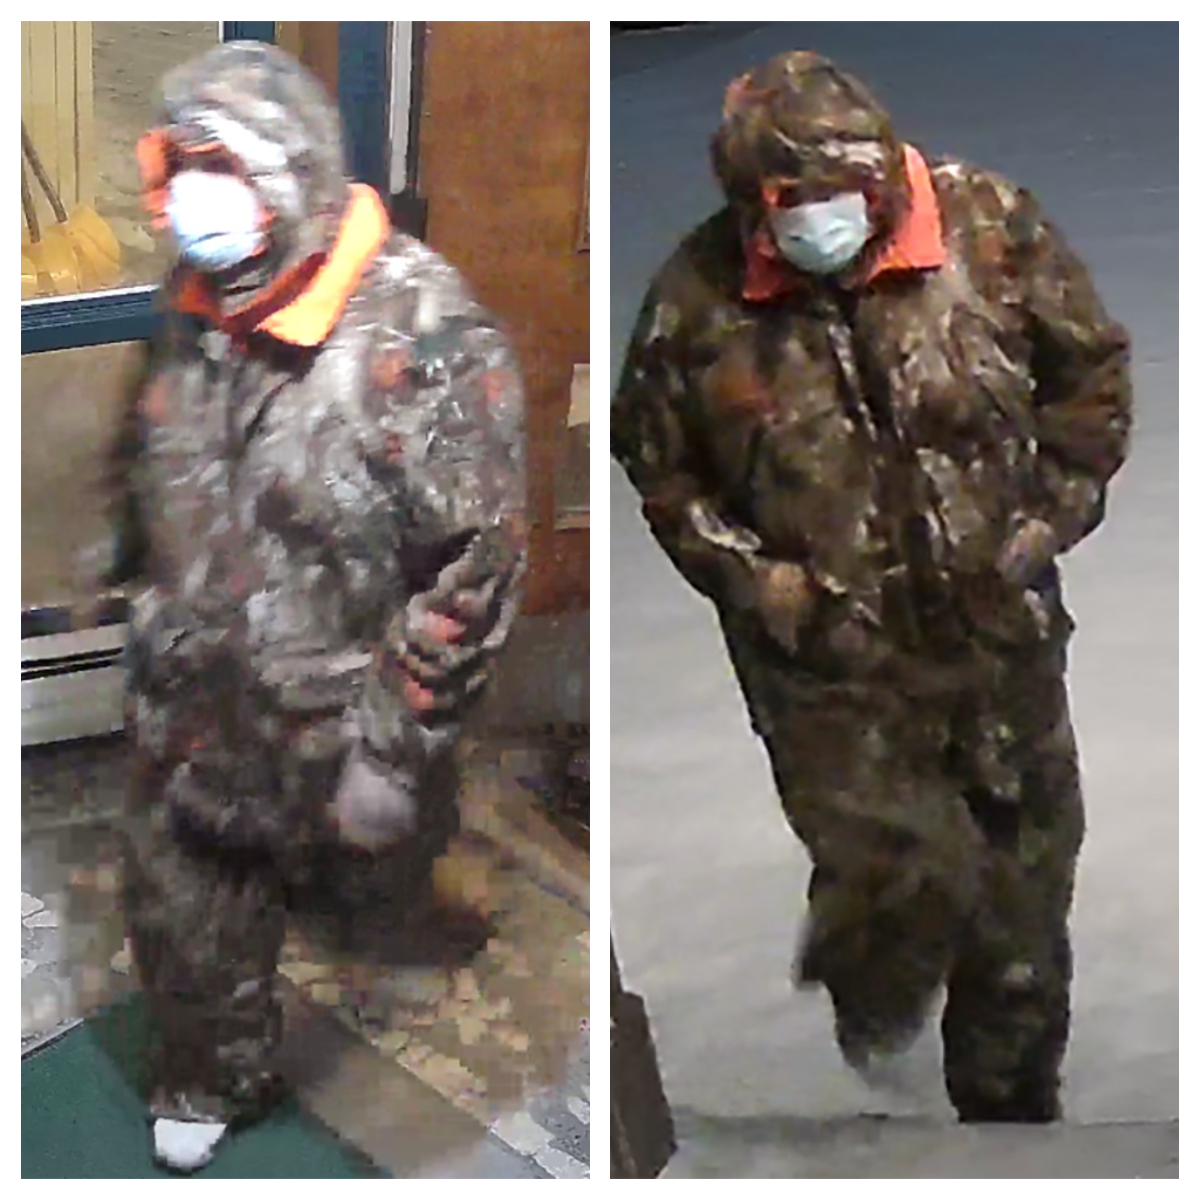 Manitoba RCMP are looking for this robbery suspect.